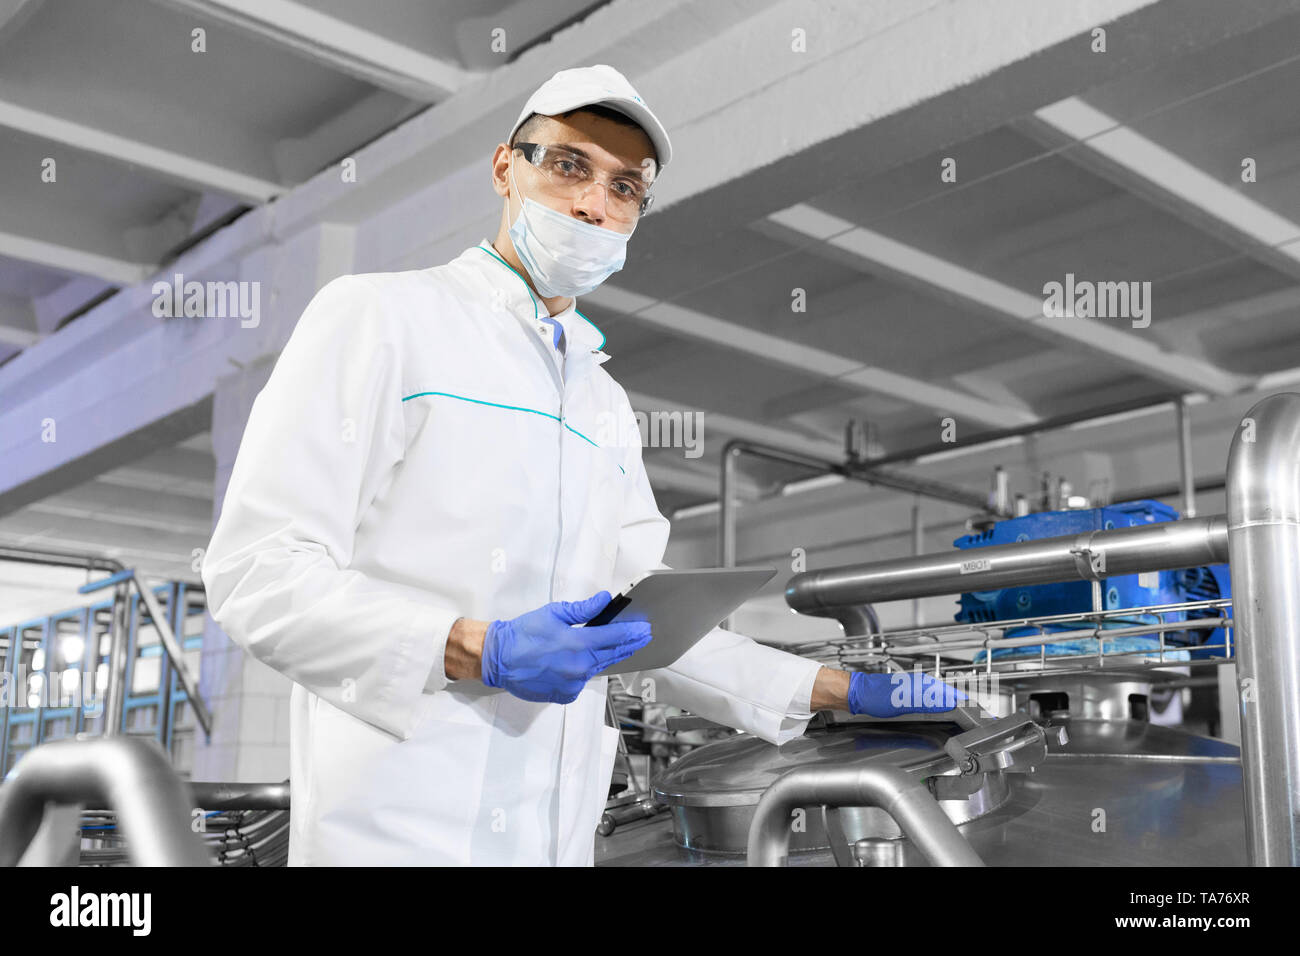 man in a white robe and a cap make an inspection of the production line Stock Photo